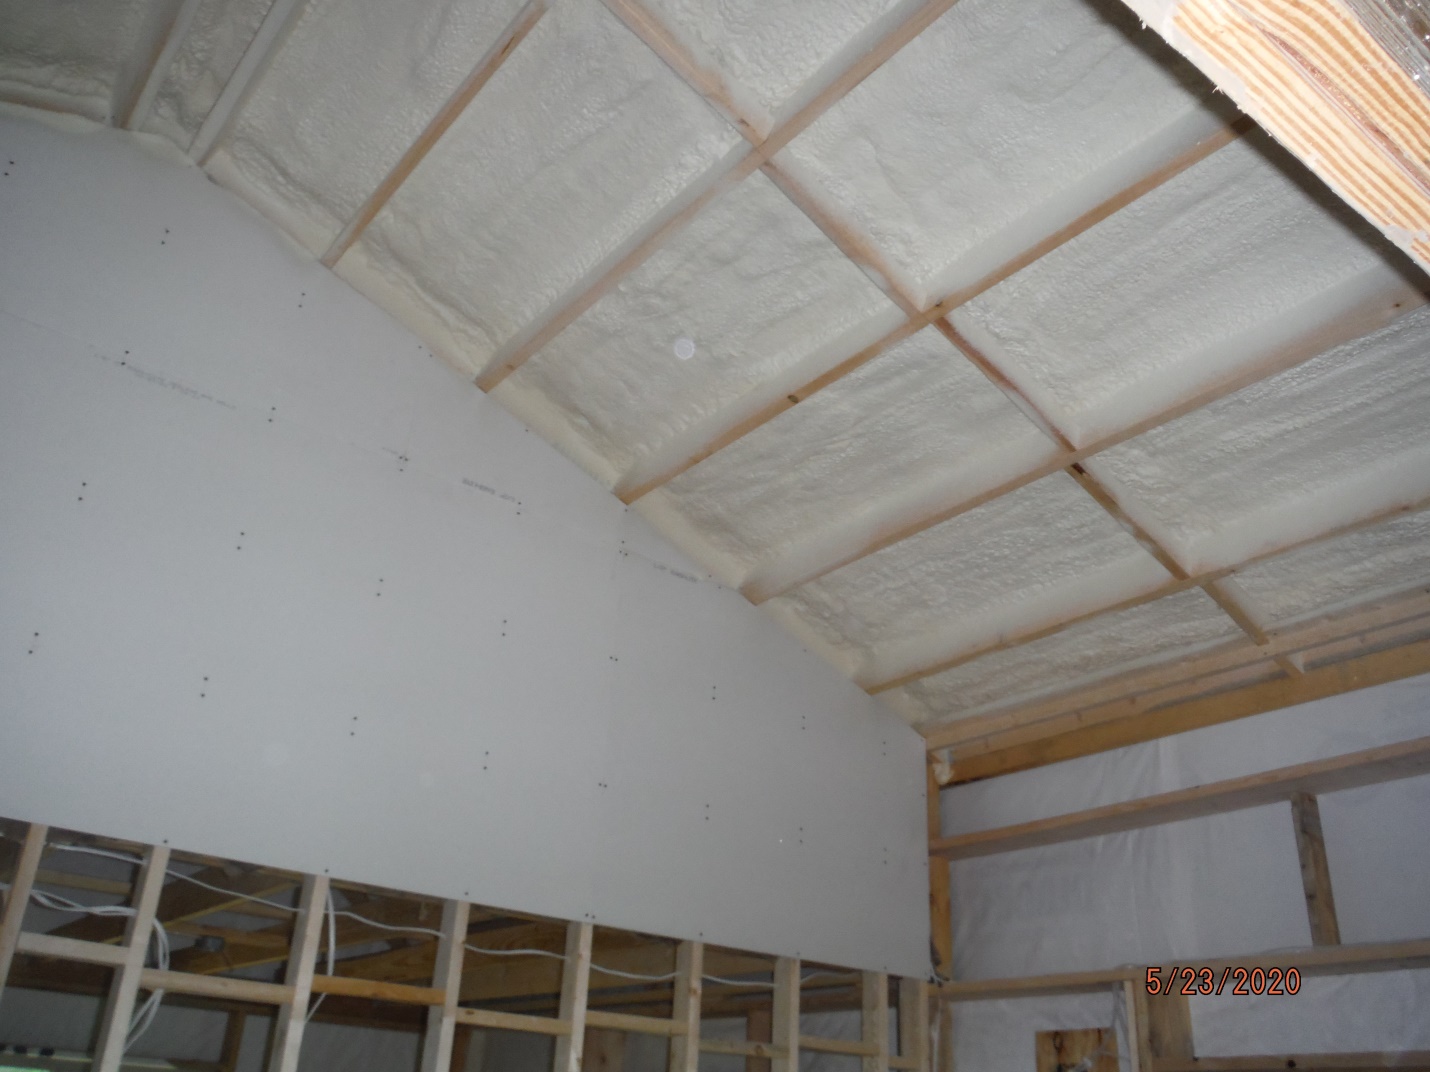 AKA Insulation - Installation of R13 kraft faced batts to 2x4 exterior  walls. Contact us for all your insulation needs.